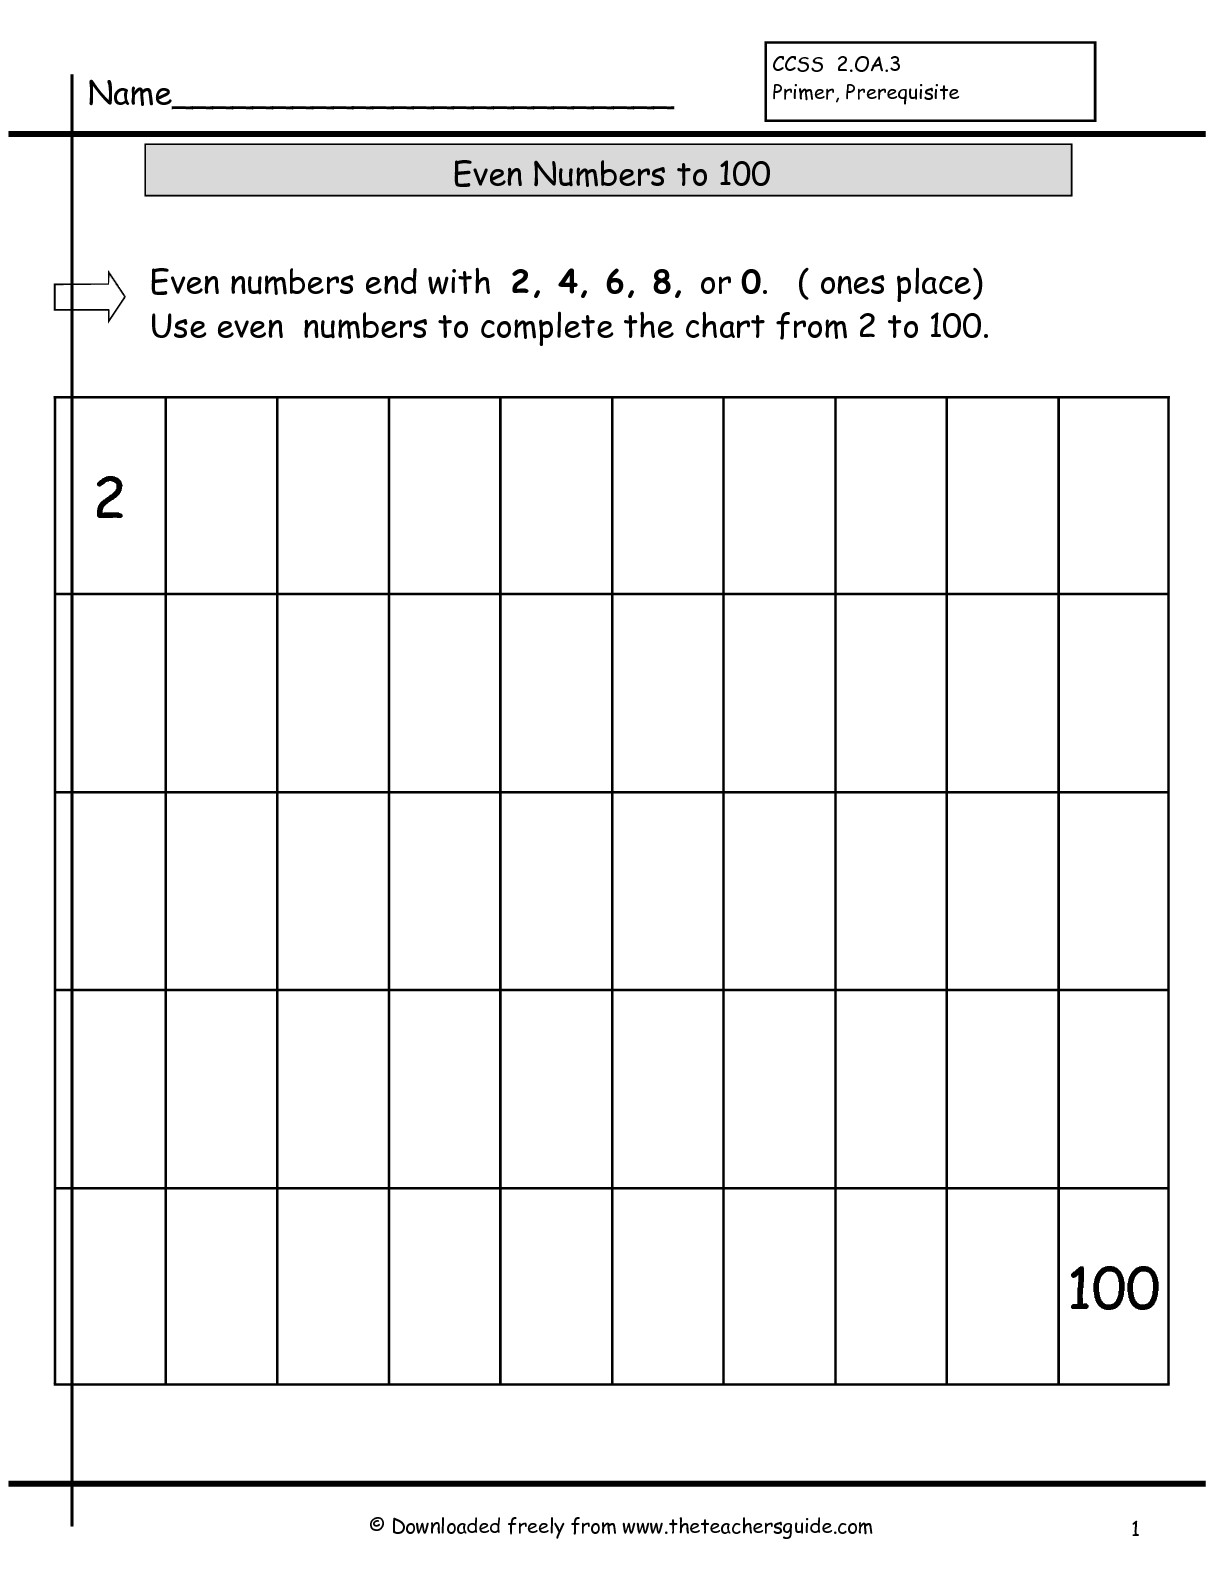 Odd and Even Numbers 1 100 Worksheet